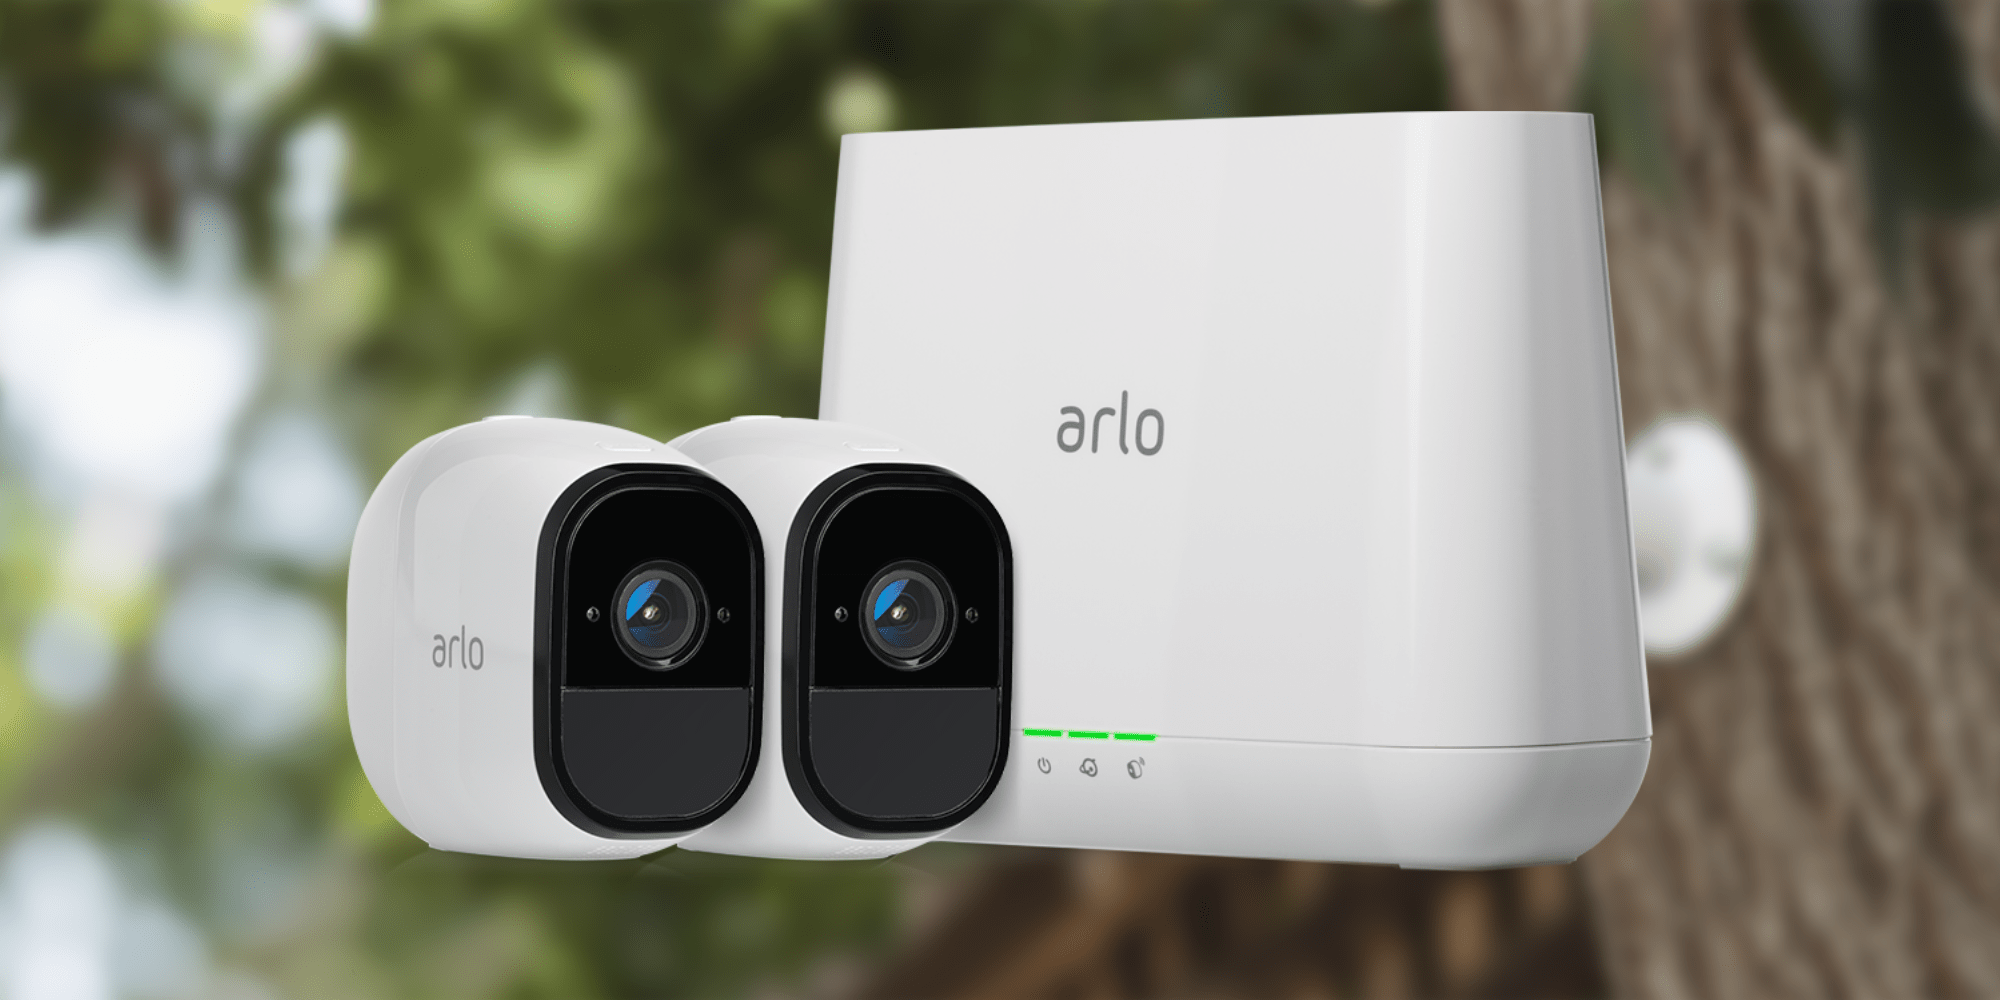 Arlo HomeKit update rolling out to Pro and Pro 2 cameras